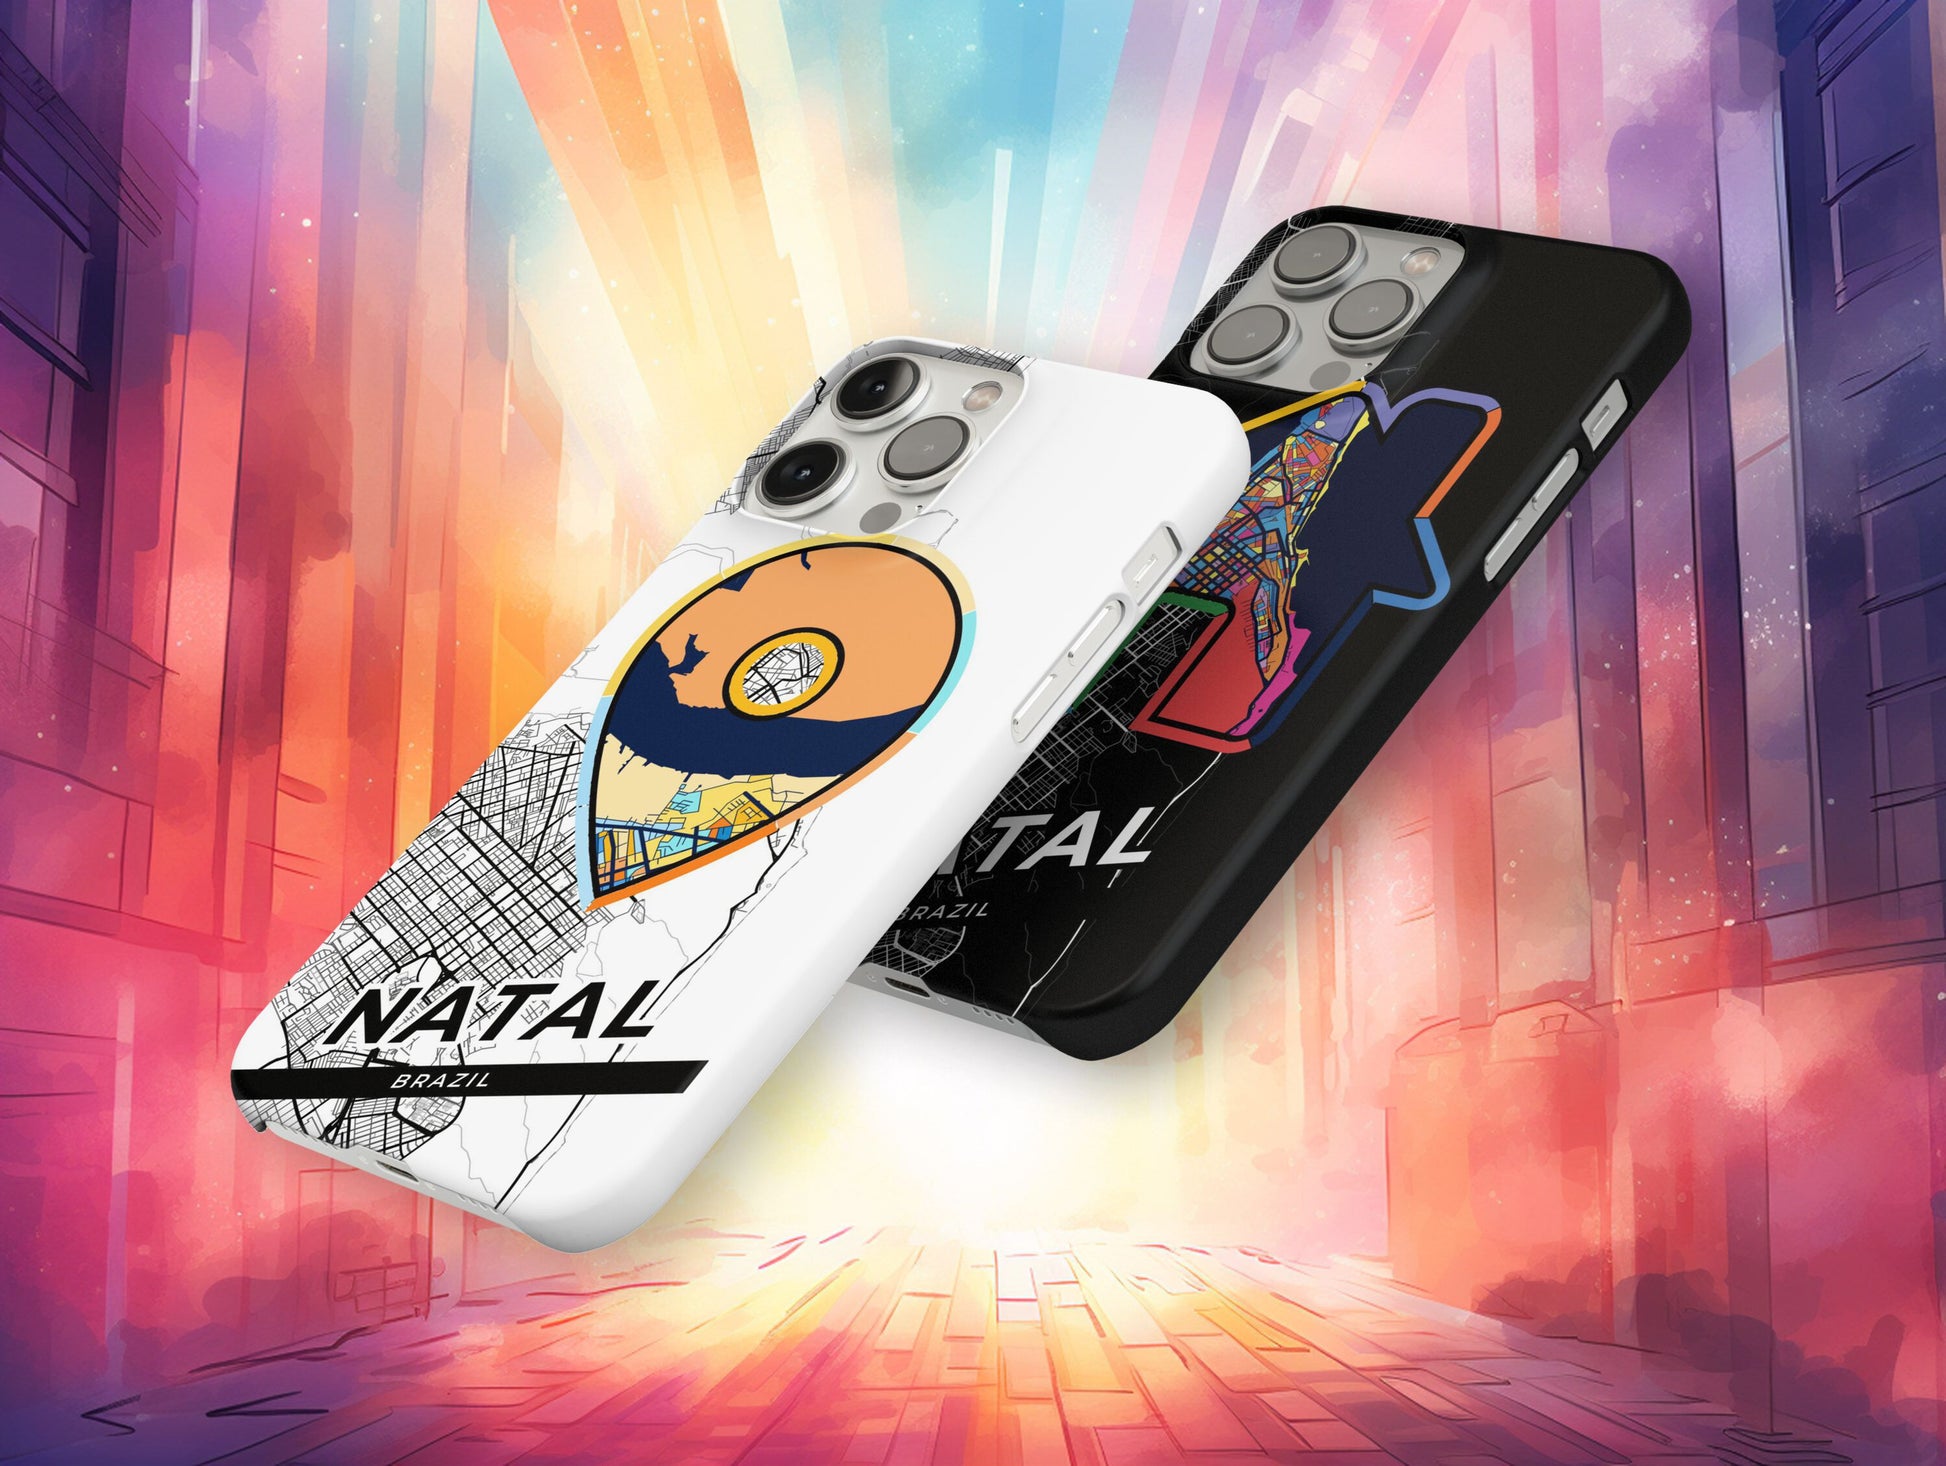 Natal Brazil slim phone case with colorful icon